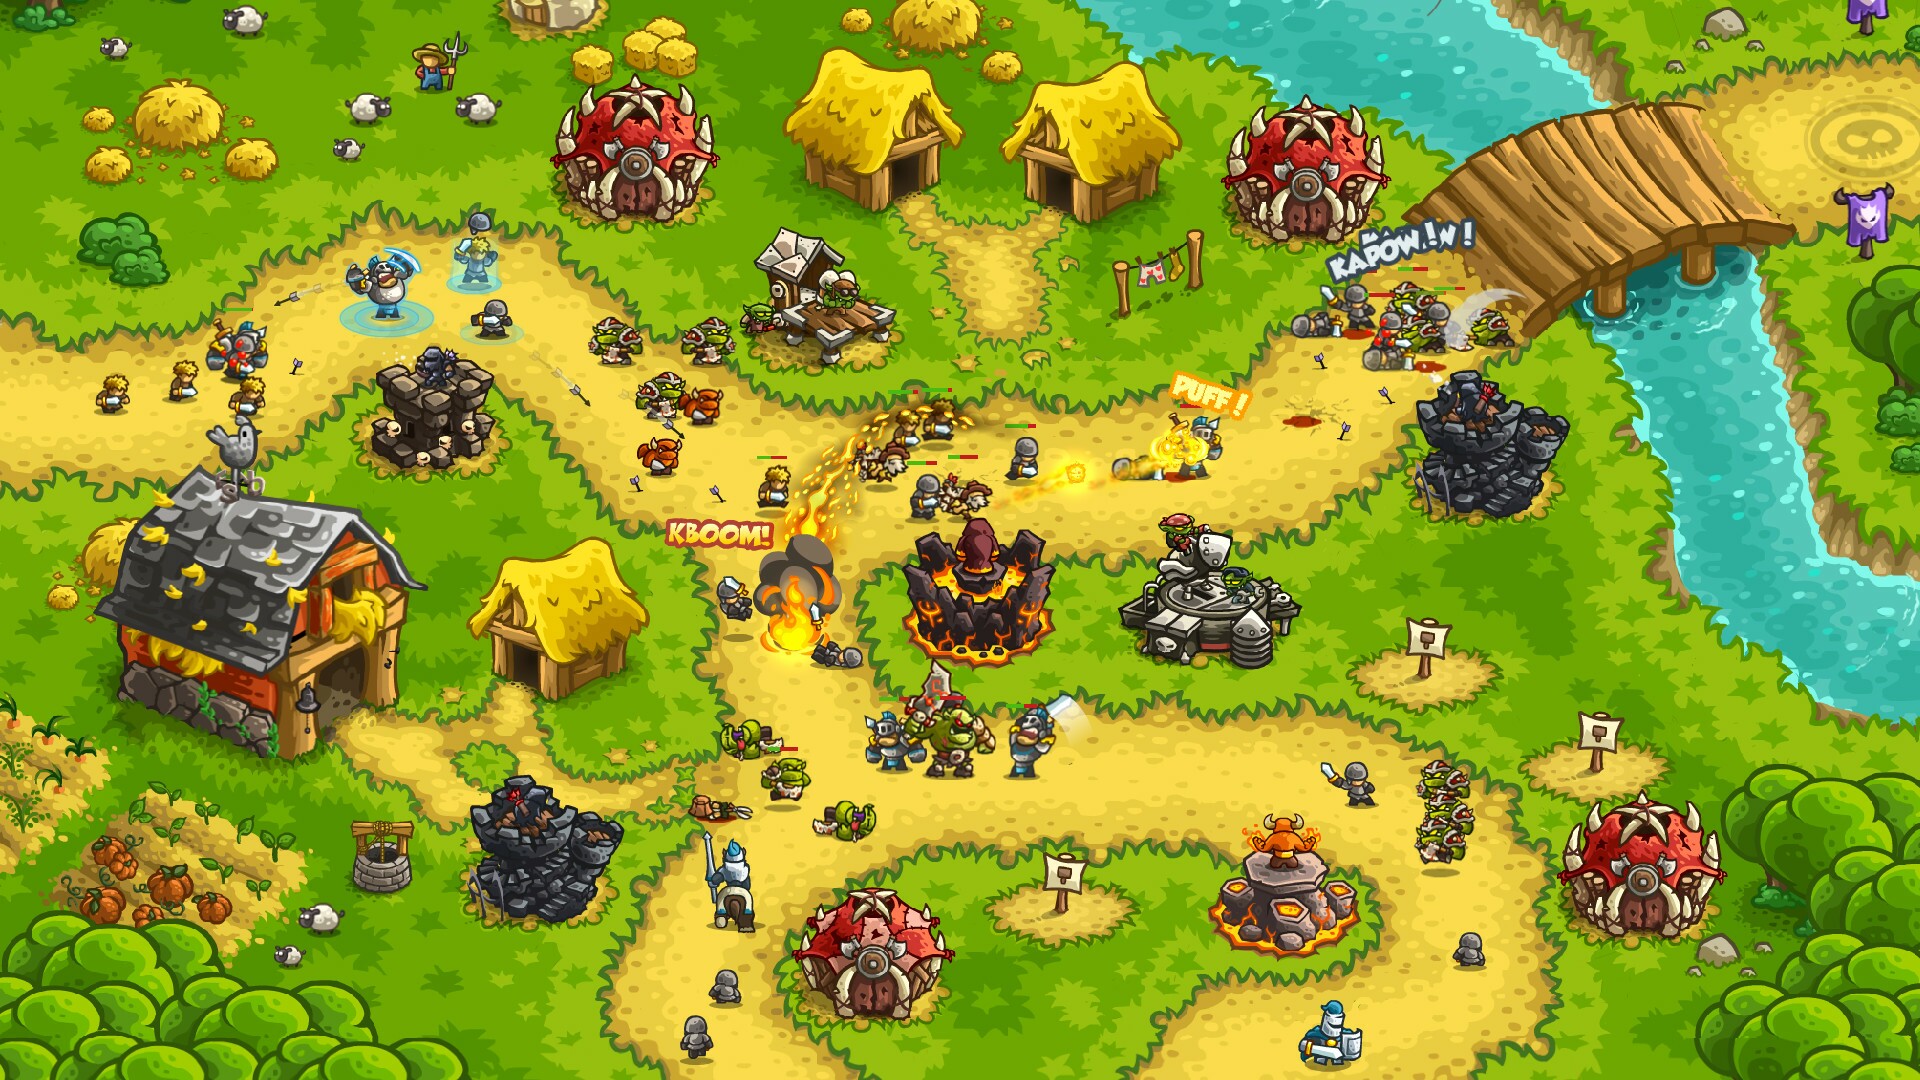 Kingdom Rush Vengeance instal the last version for android